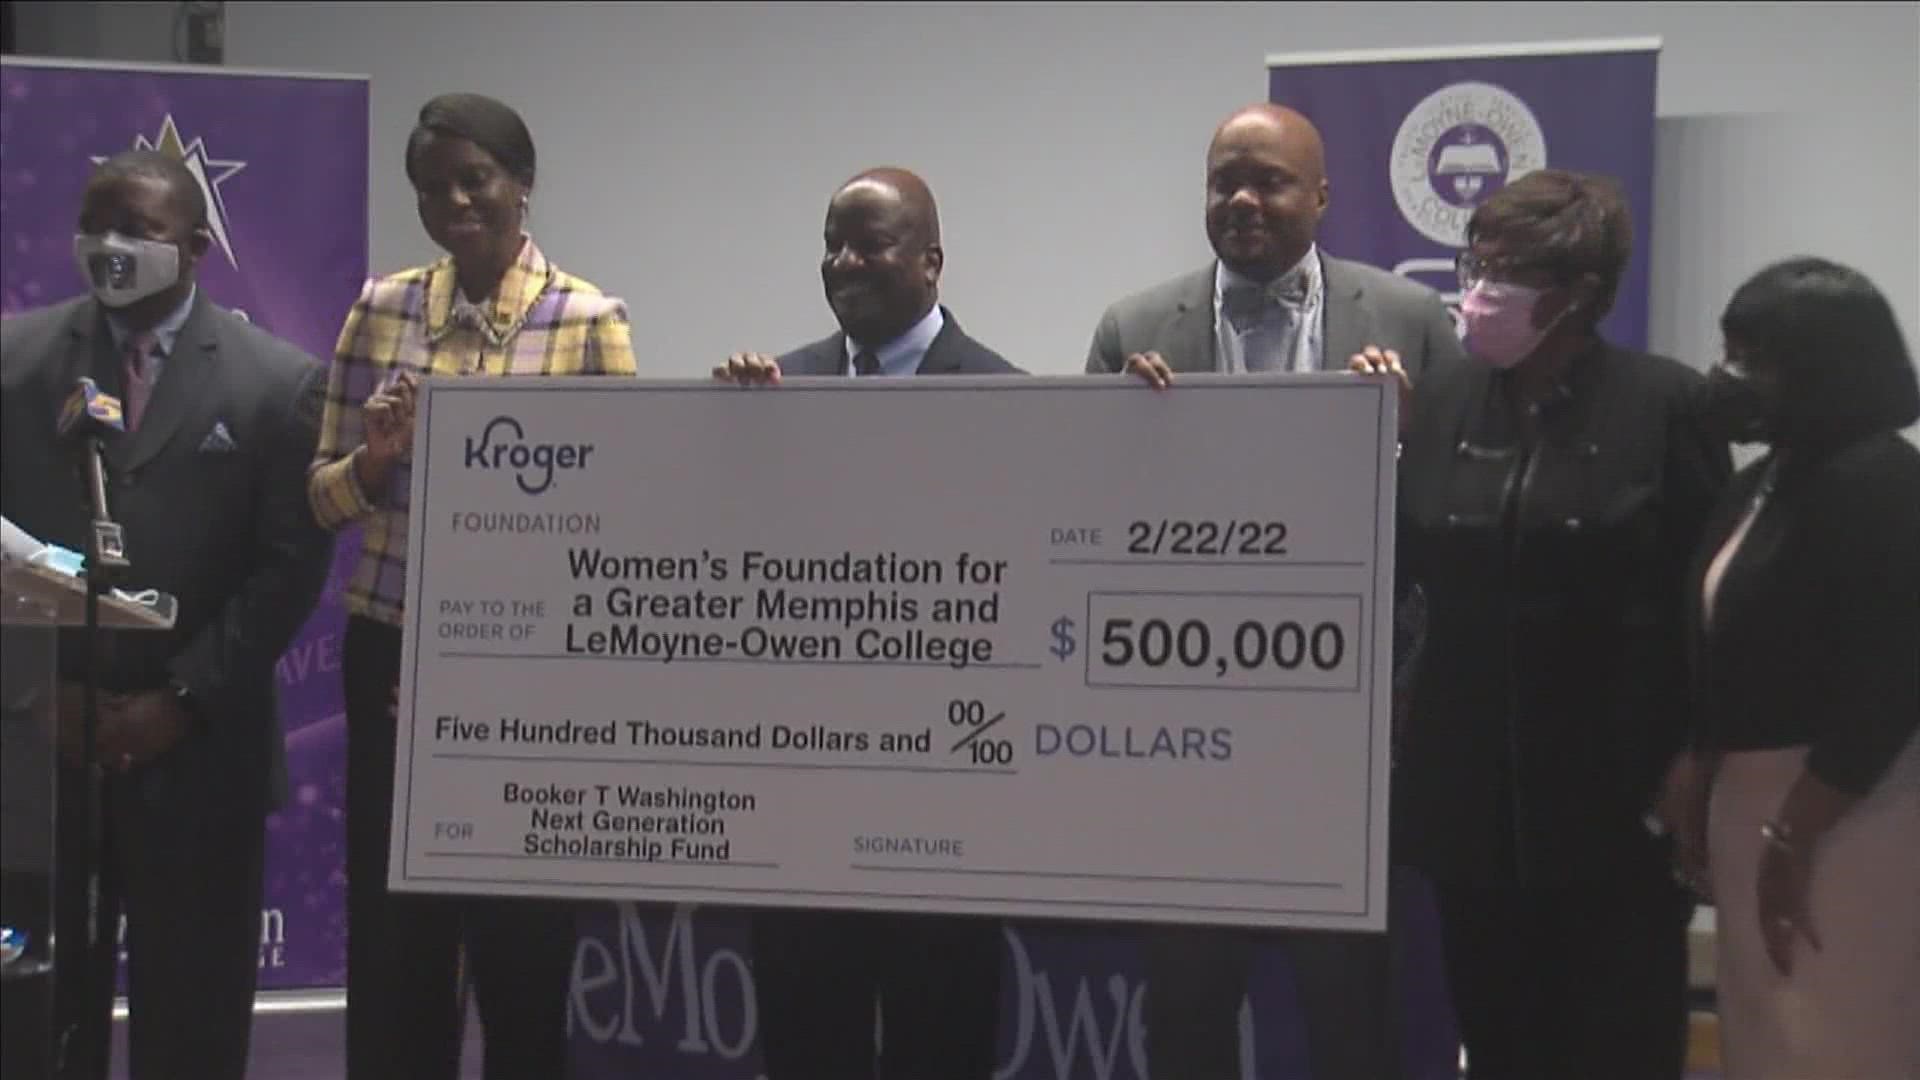 The money was granted by the Women's Foundation for a Greater Memphis.